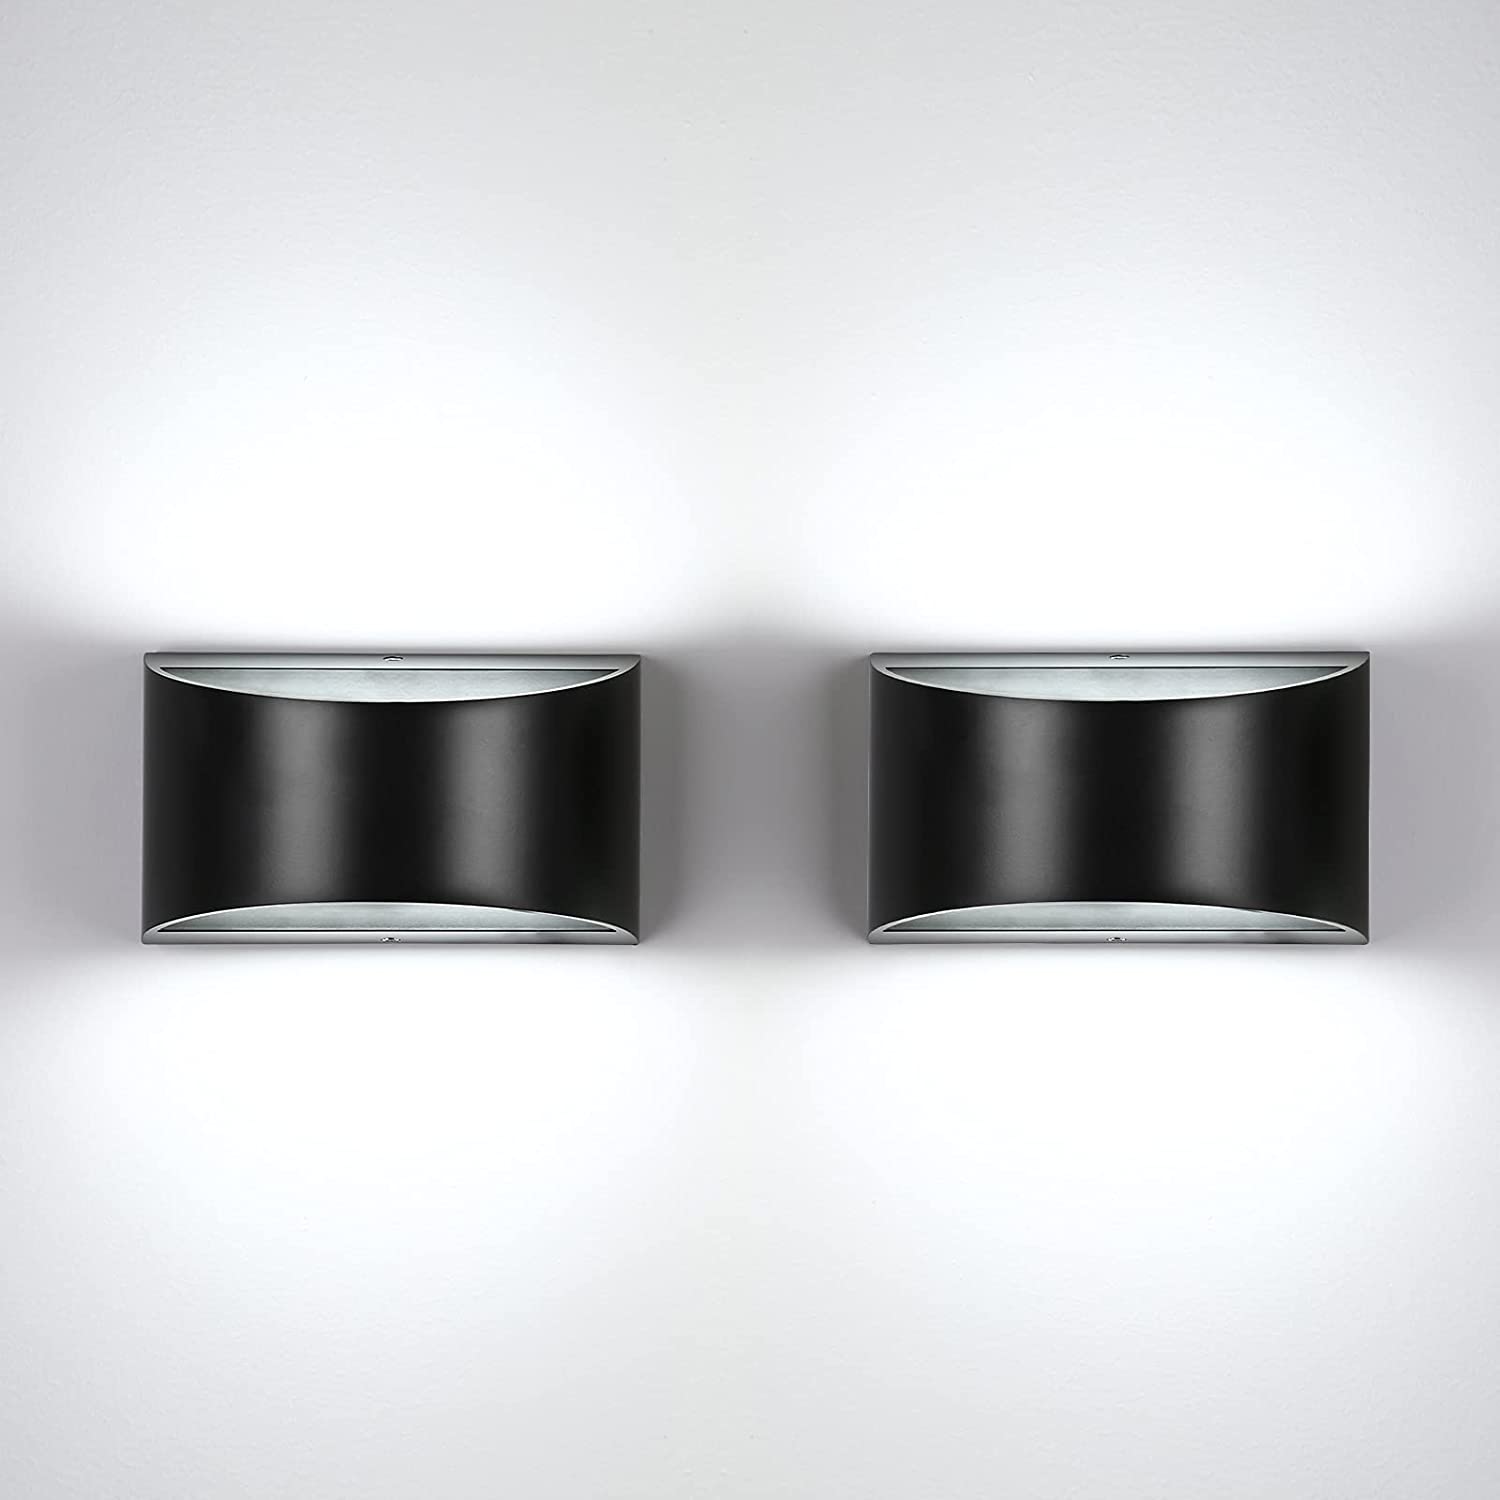 LIGHTESS Dimmable Wall Sconce Set of Black LED Wall Light Fixture  Aluminum Modern Wall Lamp for Bedroom Living Room Hallway, 12W Cool White